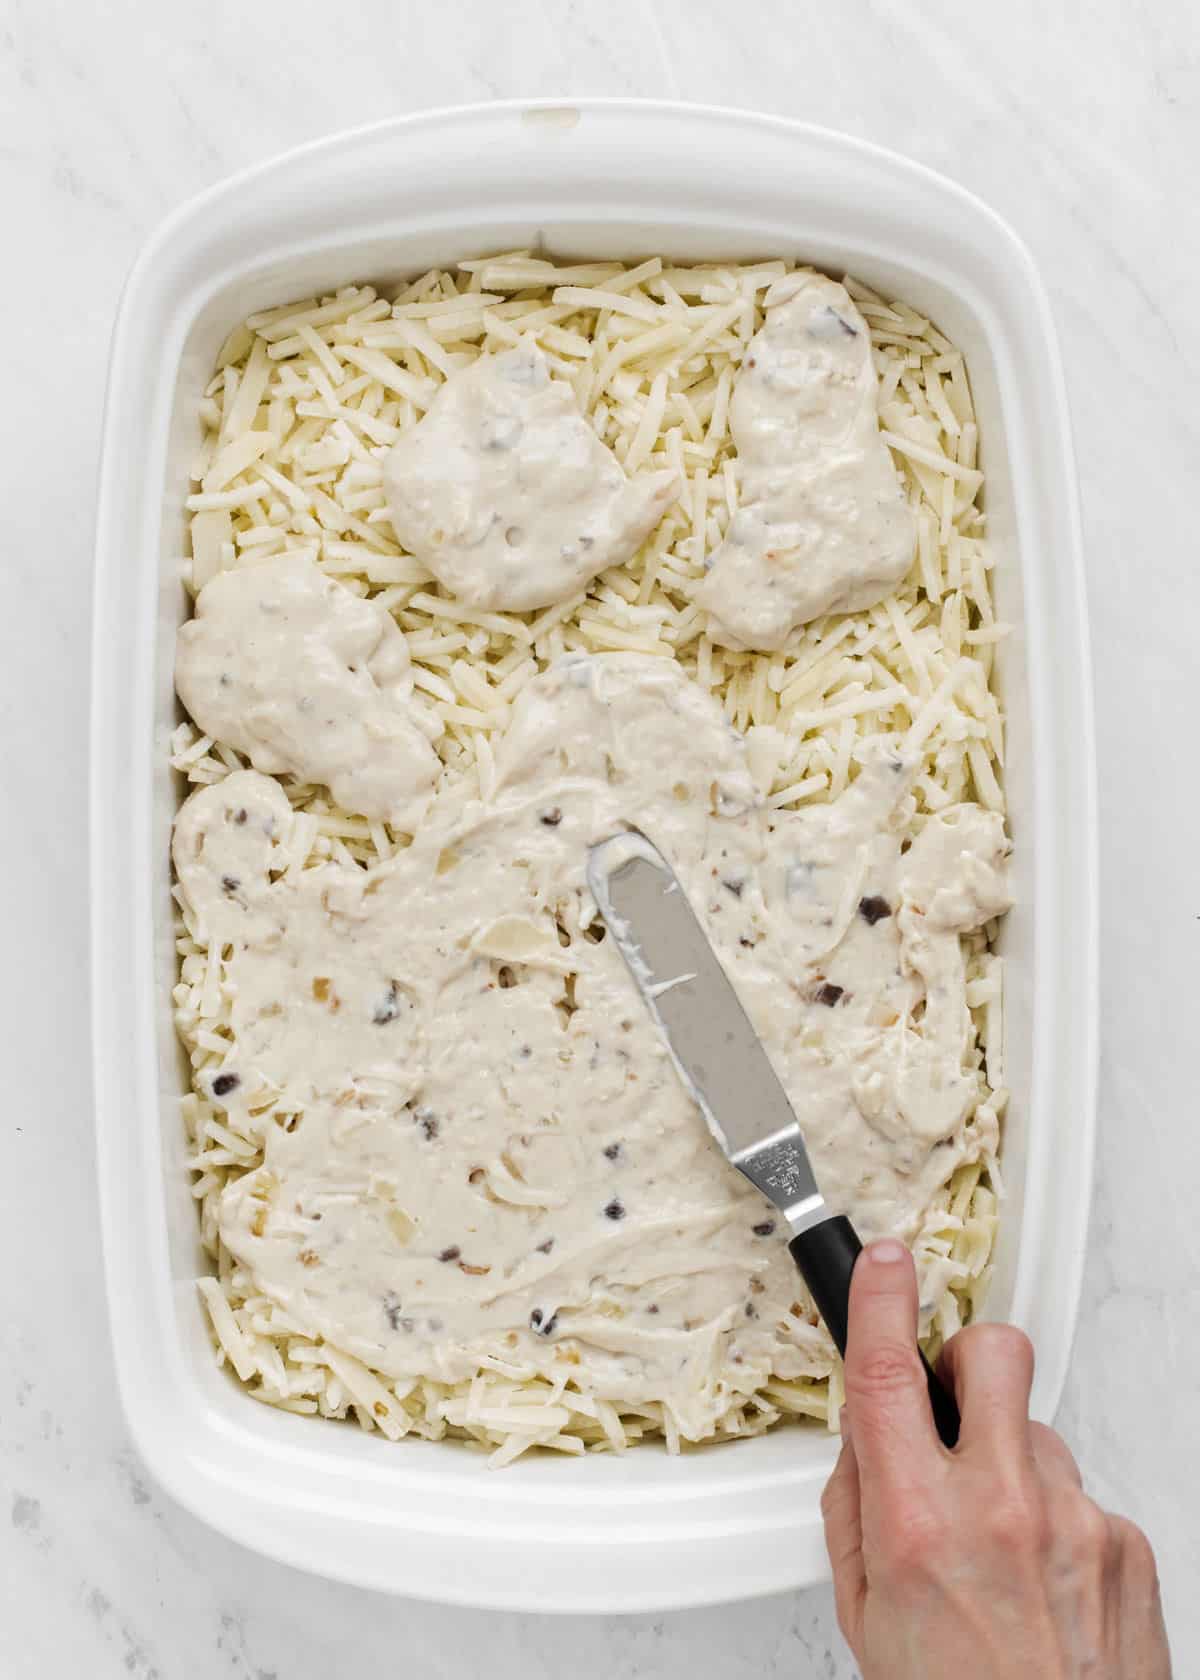 hash browns in white casserole dish with cream sauce being spread on top.